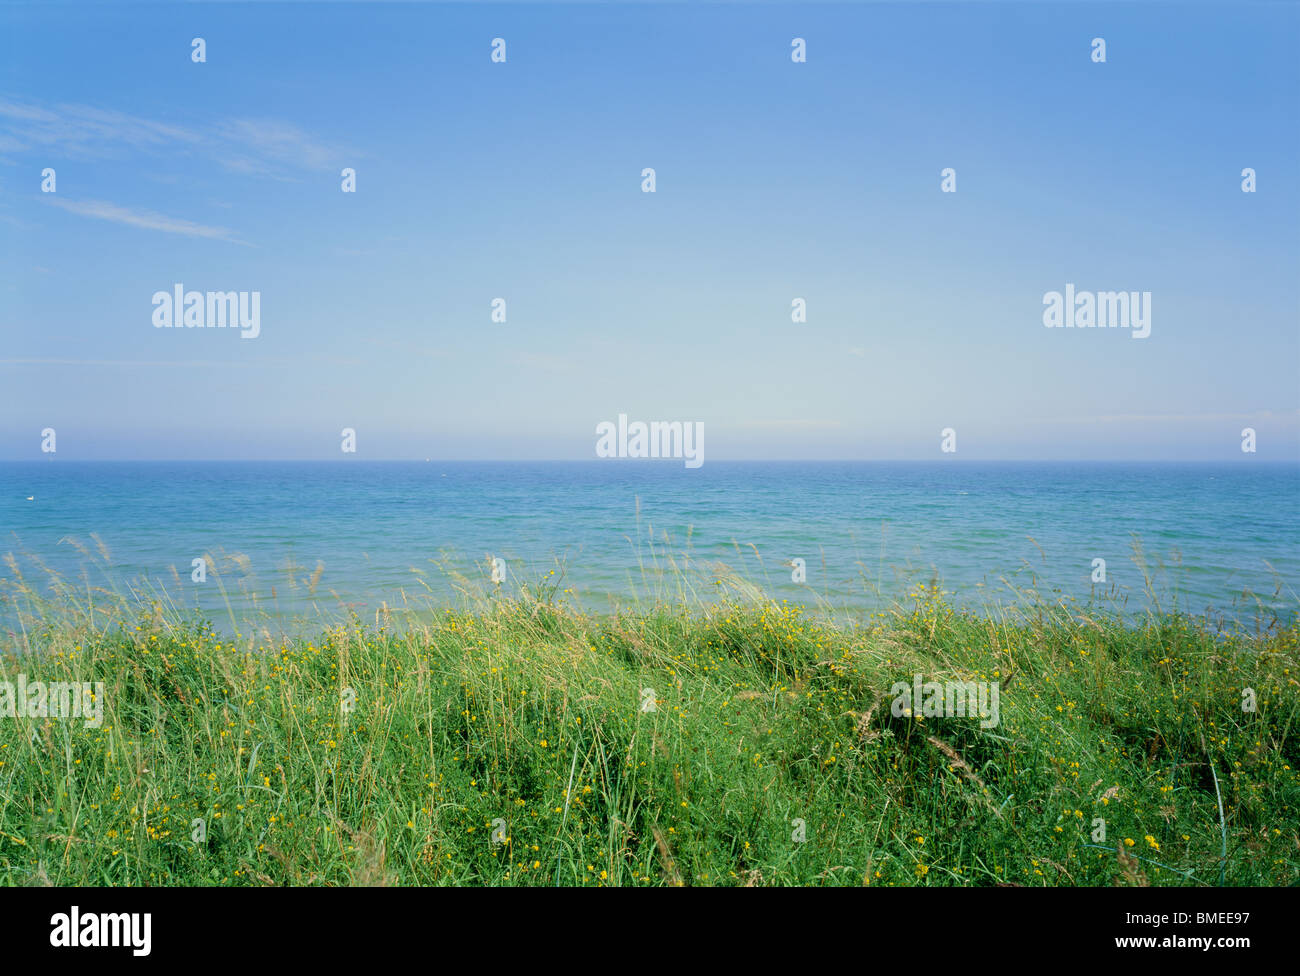 View of grass with sea in background Stock Photo